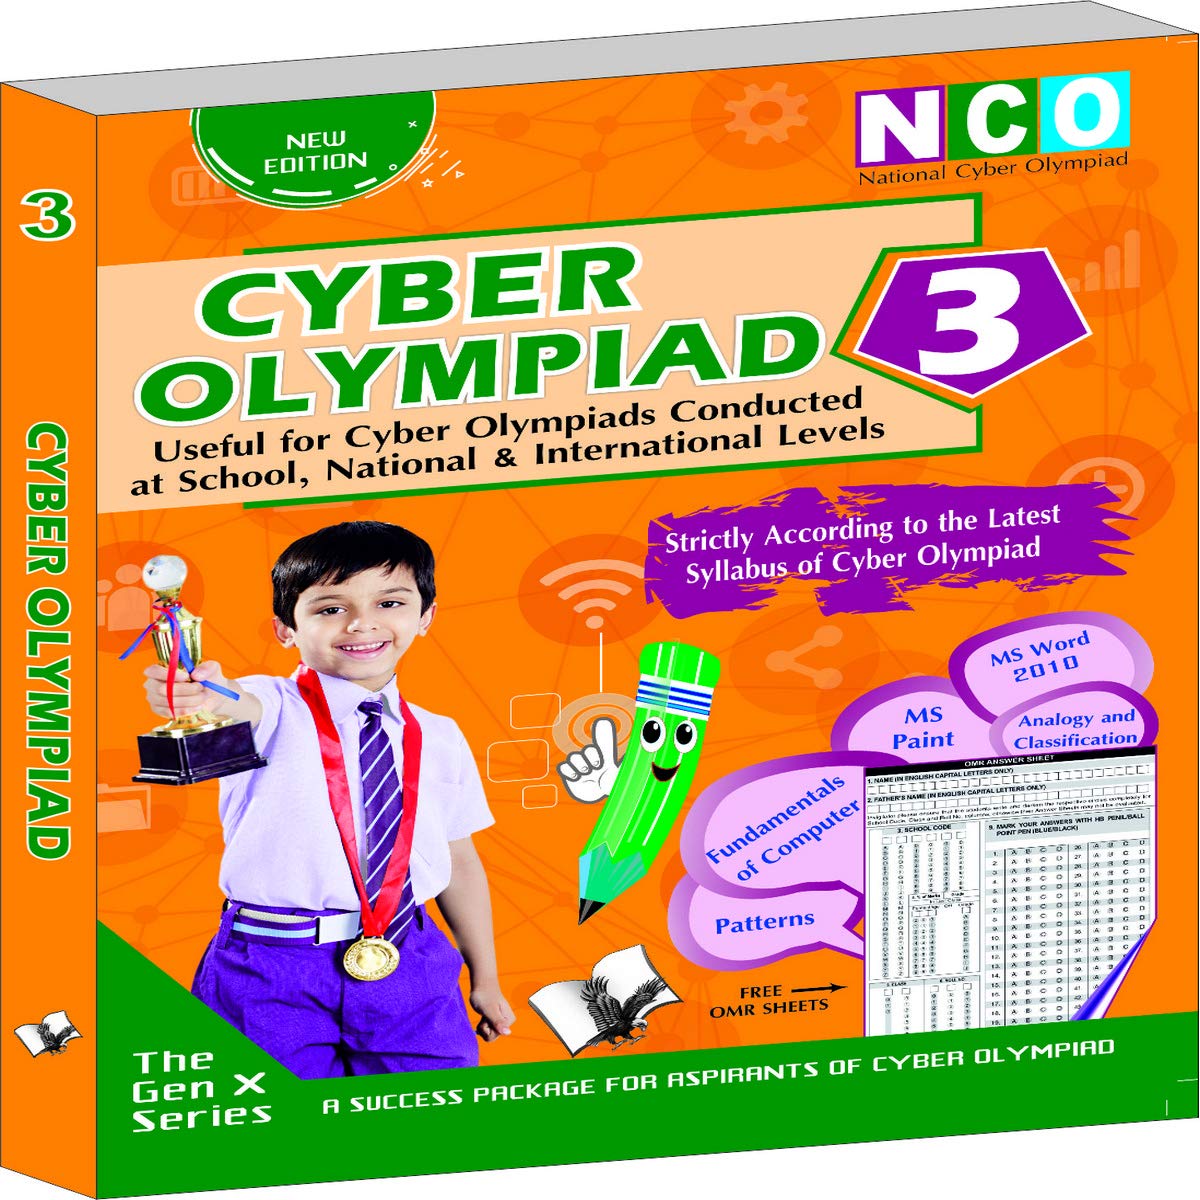 CYBER OLYMPIAD 3 (USEFUL FOR CYBER OLYMPIADS CONDUCTED AT SCHOOL, NATIONAL & INTERNATIONAL LEVELS)